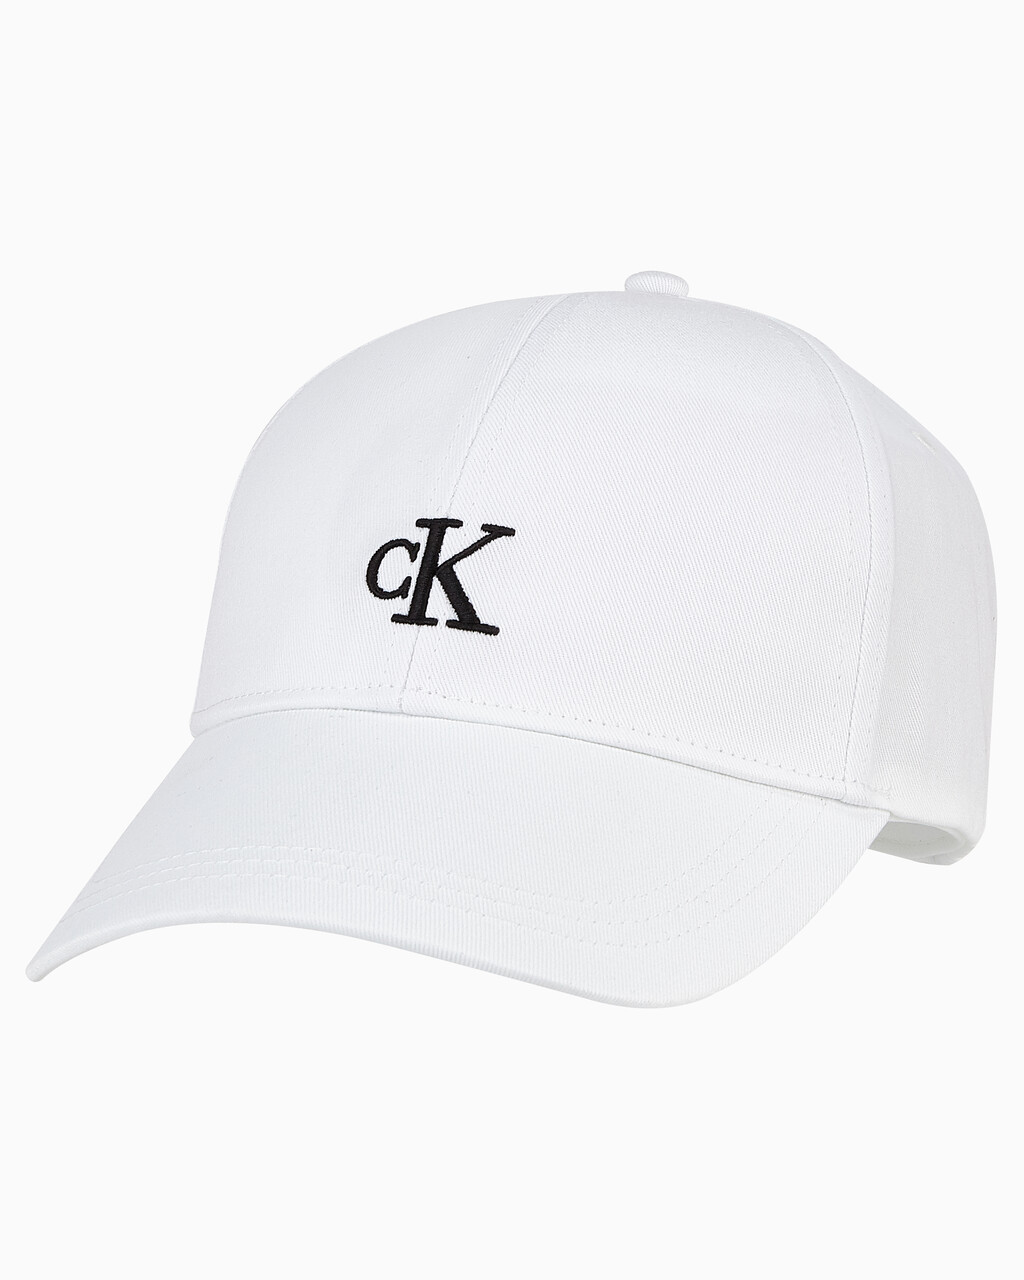 Embroidered Logo Carryover 棒球帽, BRIGHT WHITE, hi-res